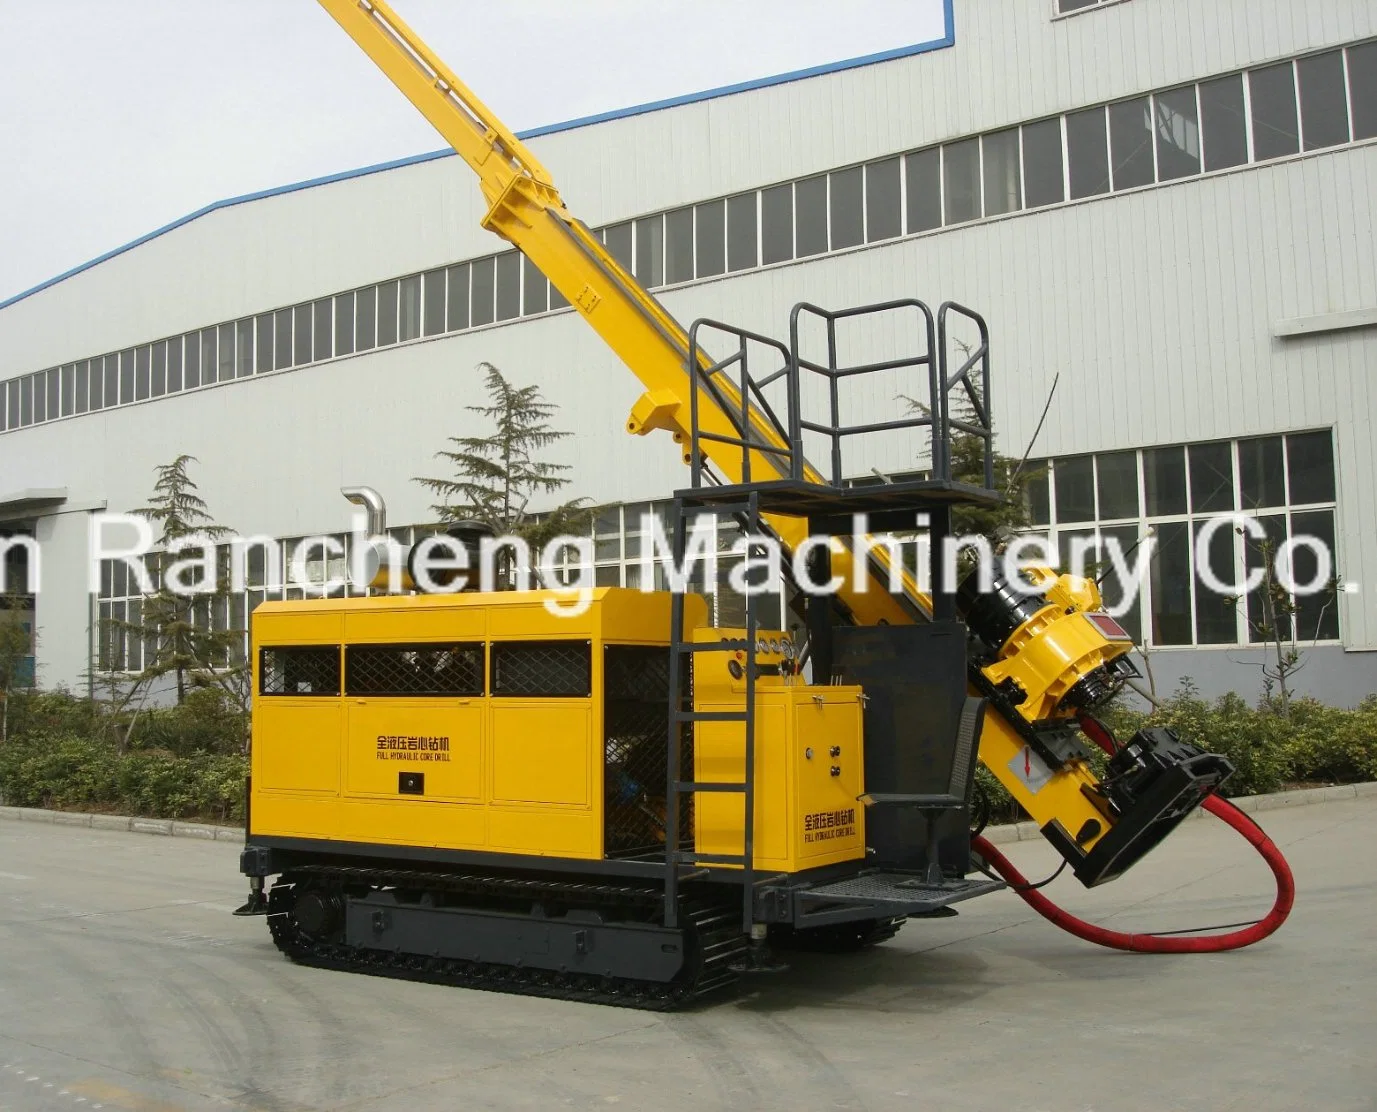 300m500m700m1000mhydraulic Rotary Drilling Rig/ Diamond Core Drilling Machine with 132kw Diesel Engine